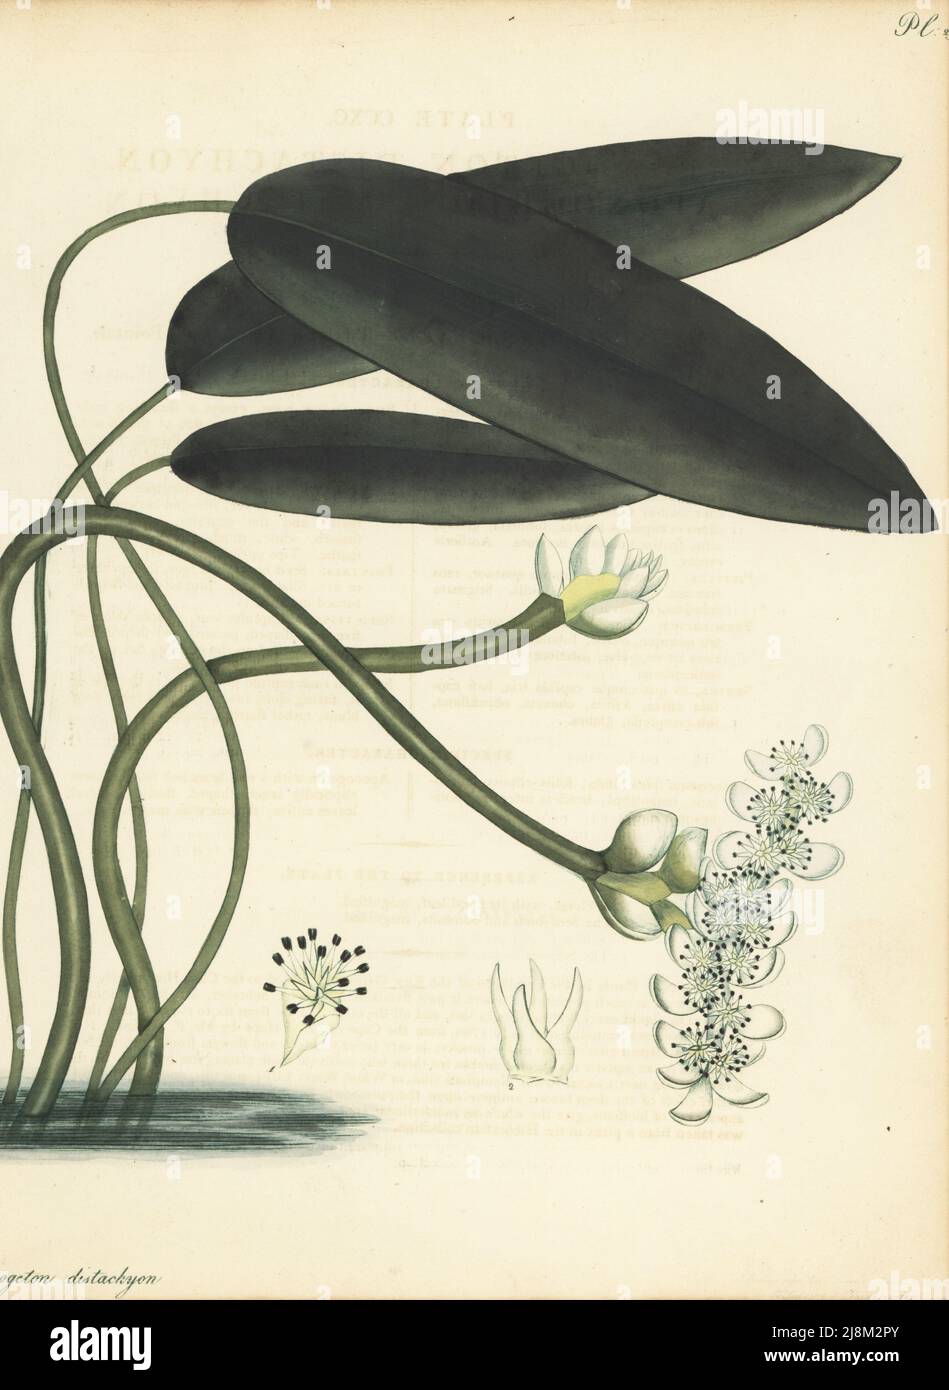 Cape-pondweed, Aponogeton distachyos. Broad-leaved aponogeton, Aponogeton distachyon. From the Cape of Good Hope, South Africa, by Scottish plant hunter Francis Masson. Copperplate engraving drawn, engraved and hand-coloured by Henry Andrews from his Botanical Register, Volume 5, self-published in Knightsbridge, London, 1803. Stock Photo